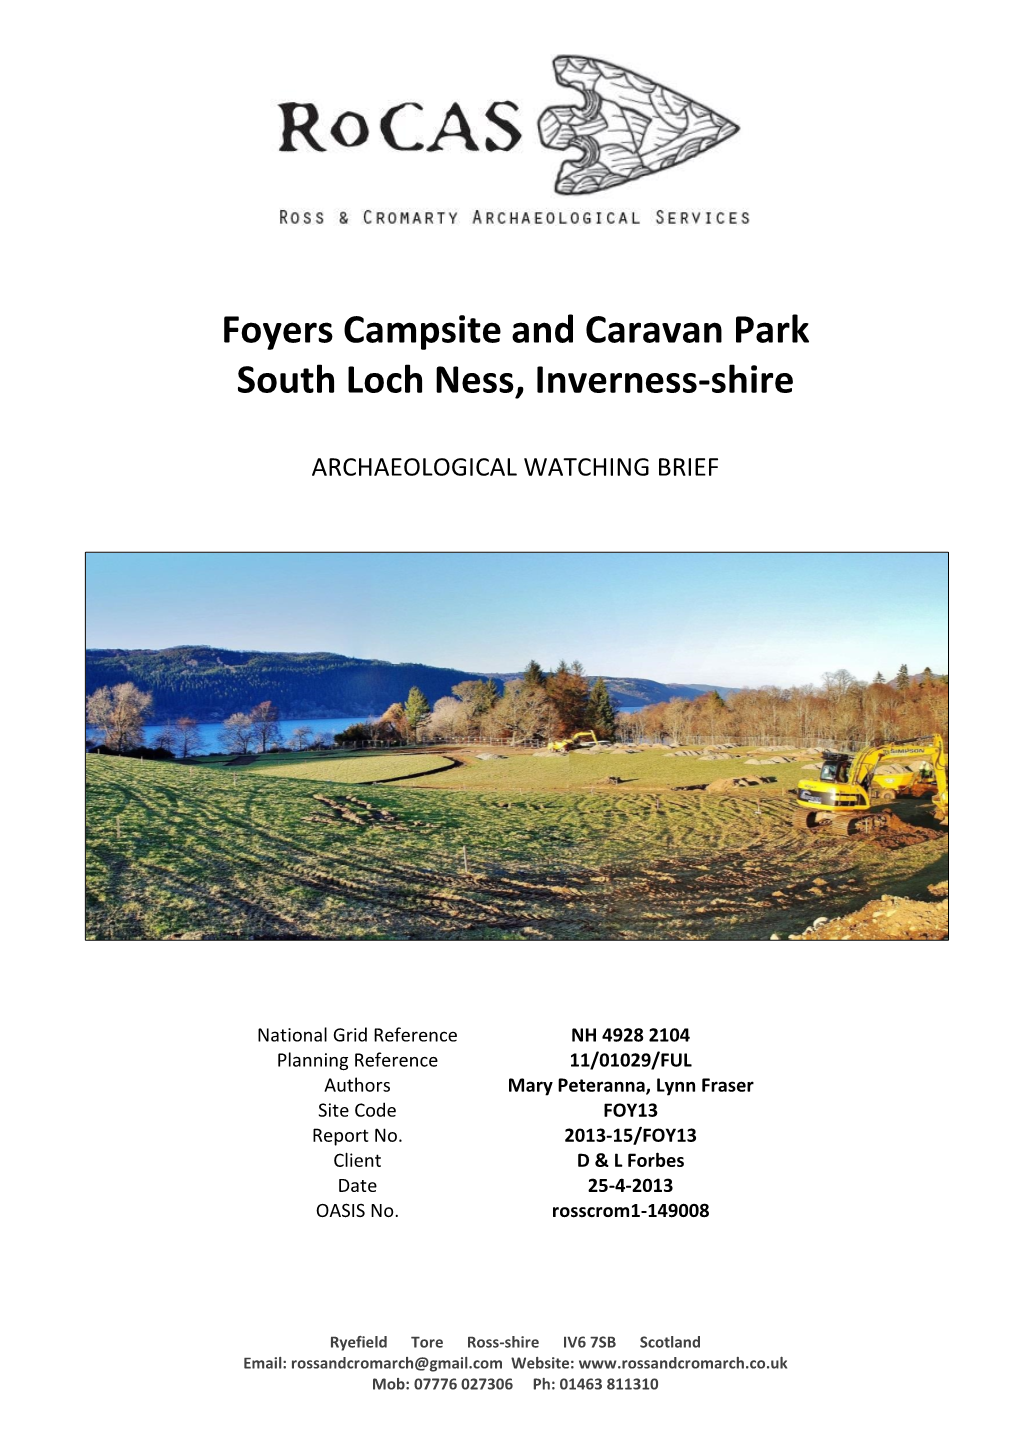 Foyers Campsite and Caravan Park South Loch Ness, Inverness-Shire